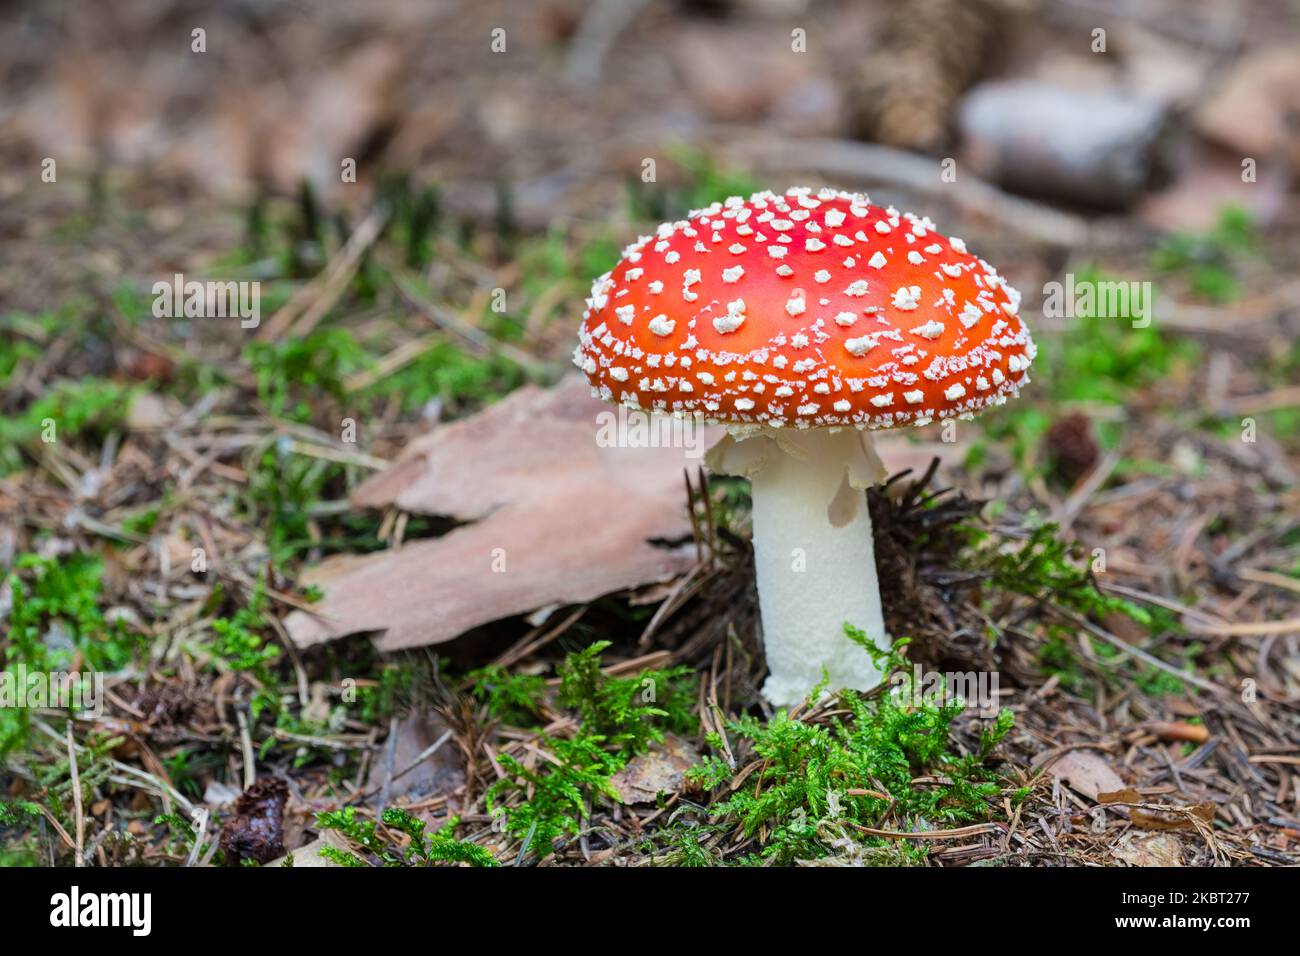 Closeup a beautiful fly agaric mushroom with white warty spots on red cap. Amanita muscaria. Dangerous toadstool in nature green moss on forest ground. Stock Photo